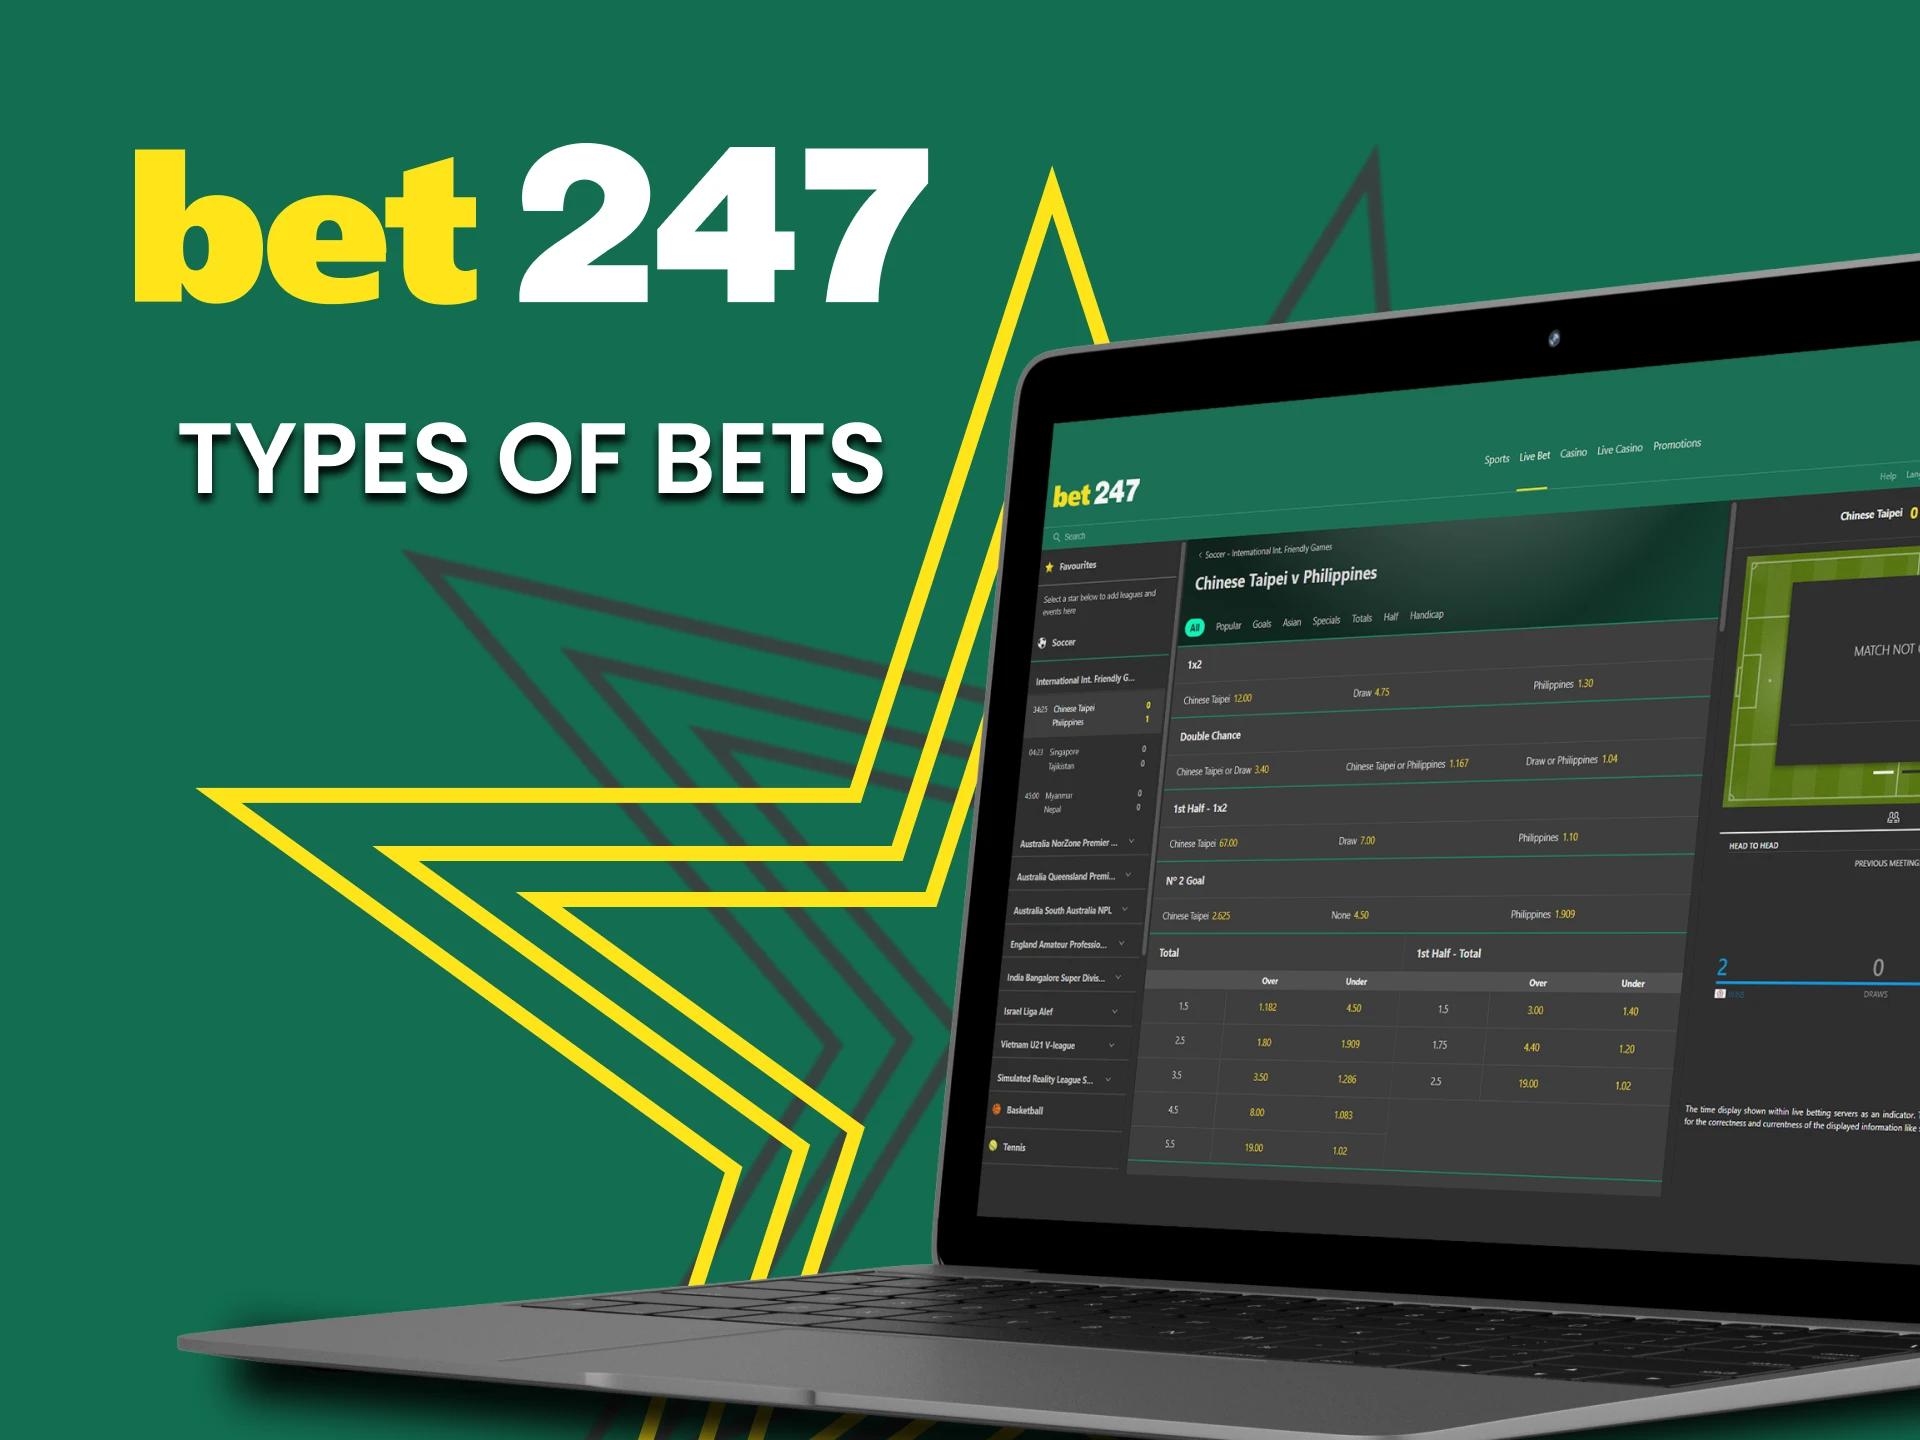 At Bet247 try the best types of bets.